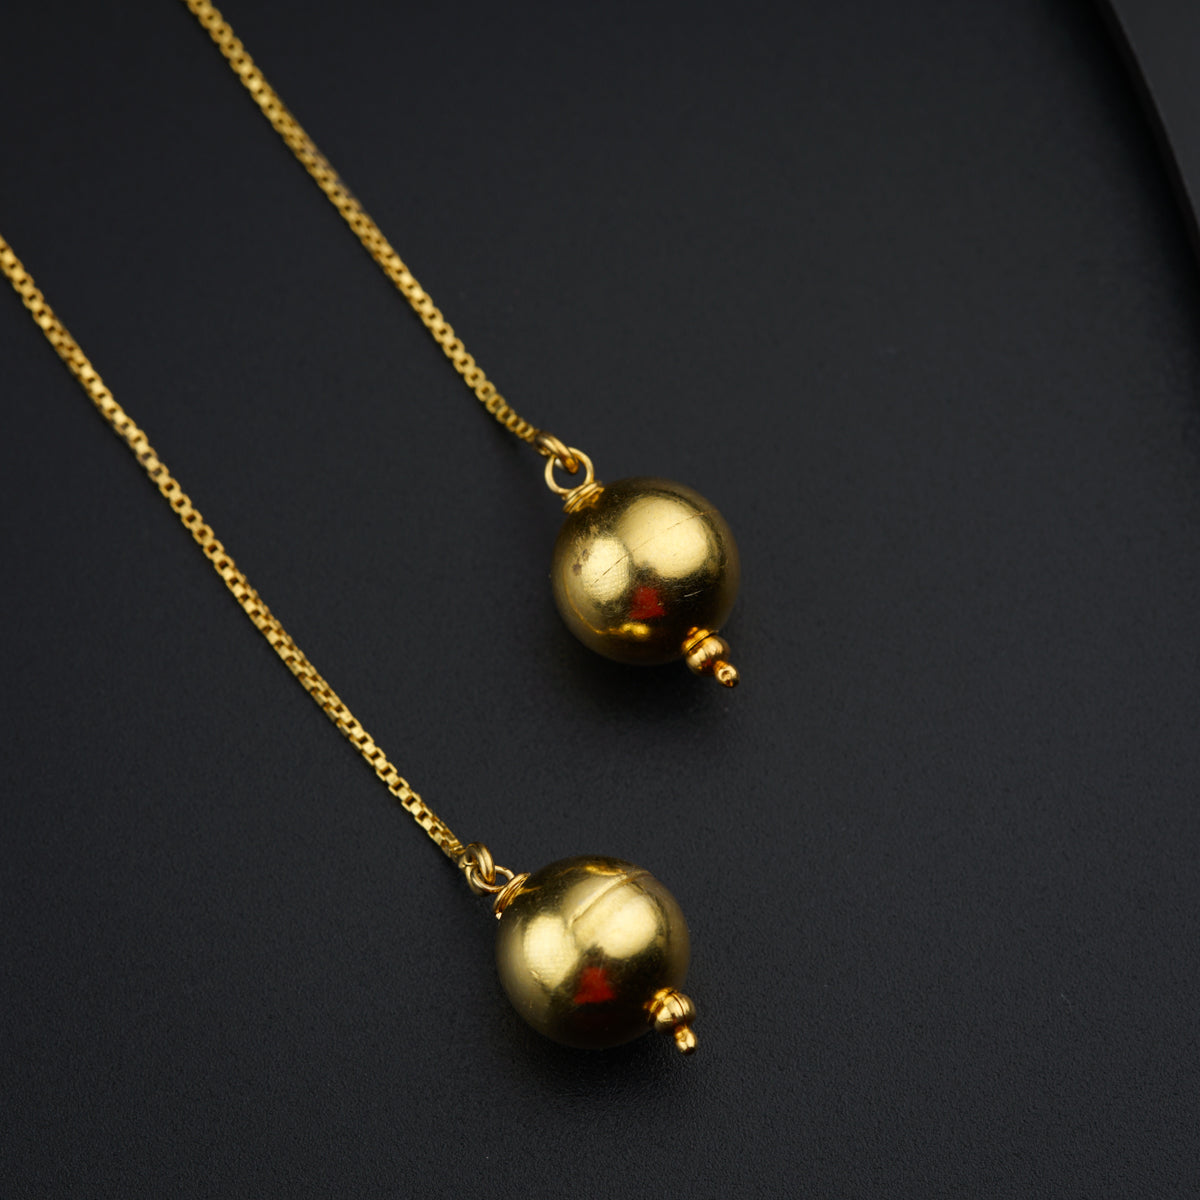 a pair of gold necklaces on a black surface